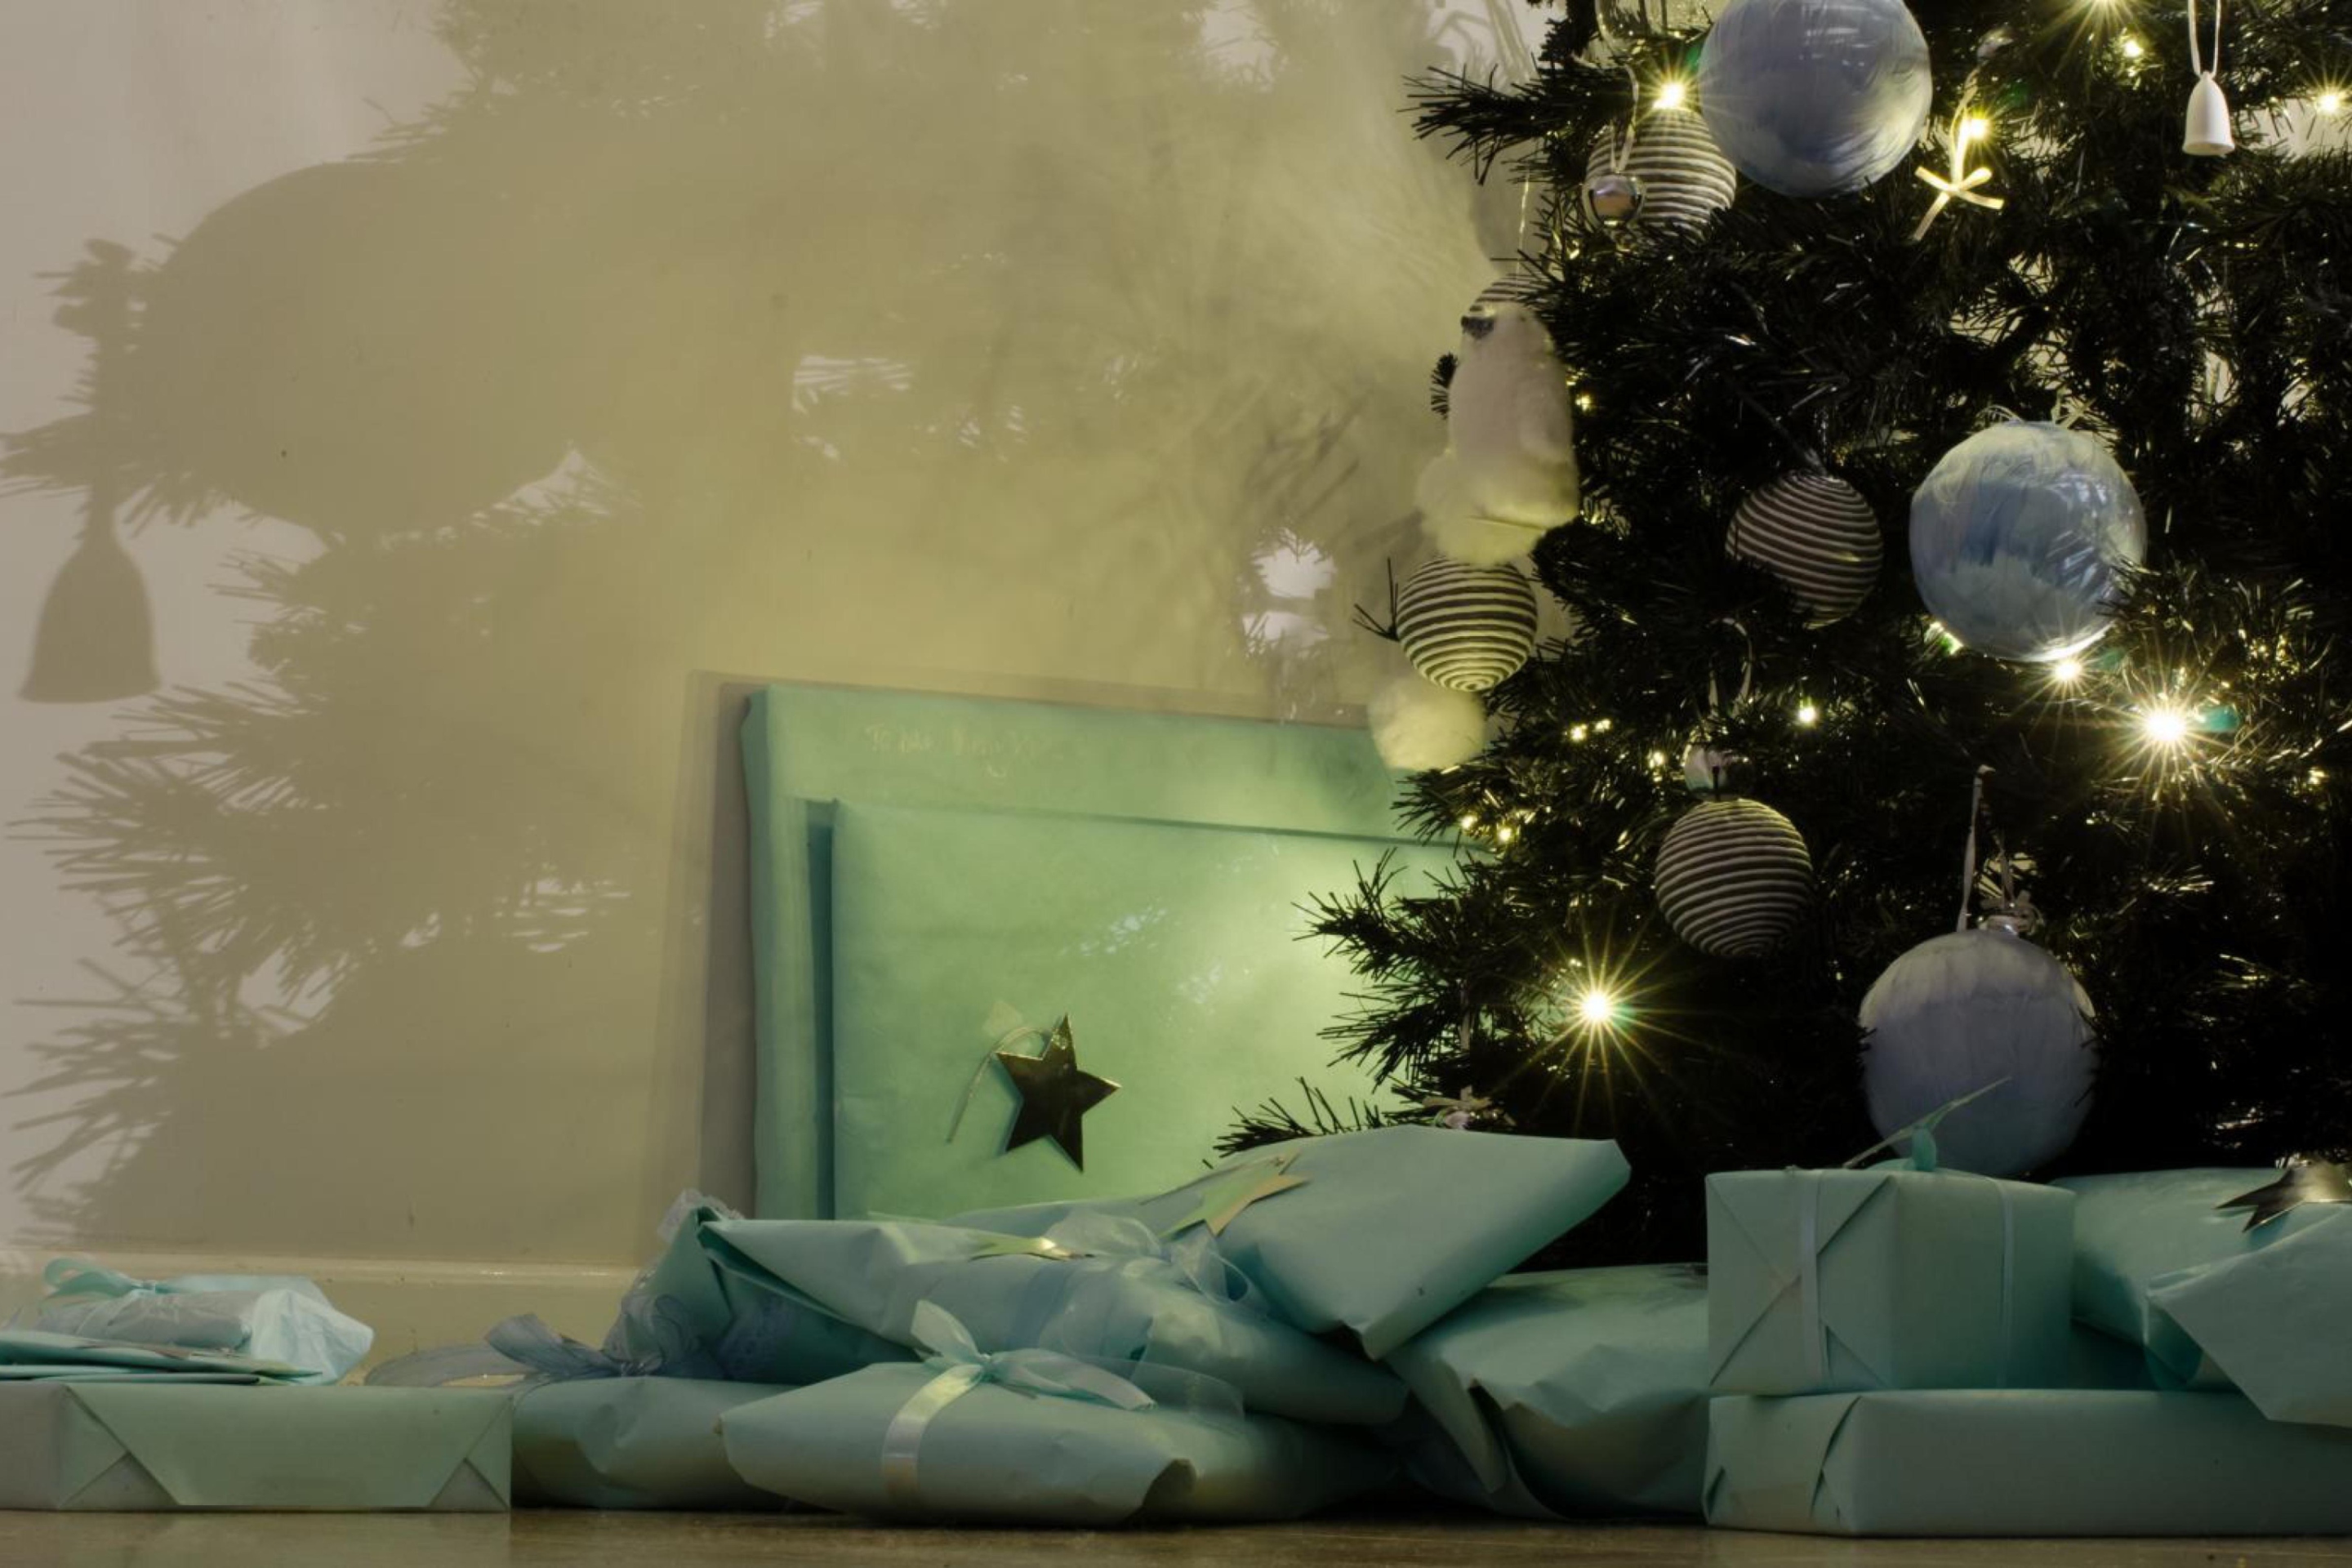 Presents And Christmas Tree wallpaper 2880x1920